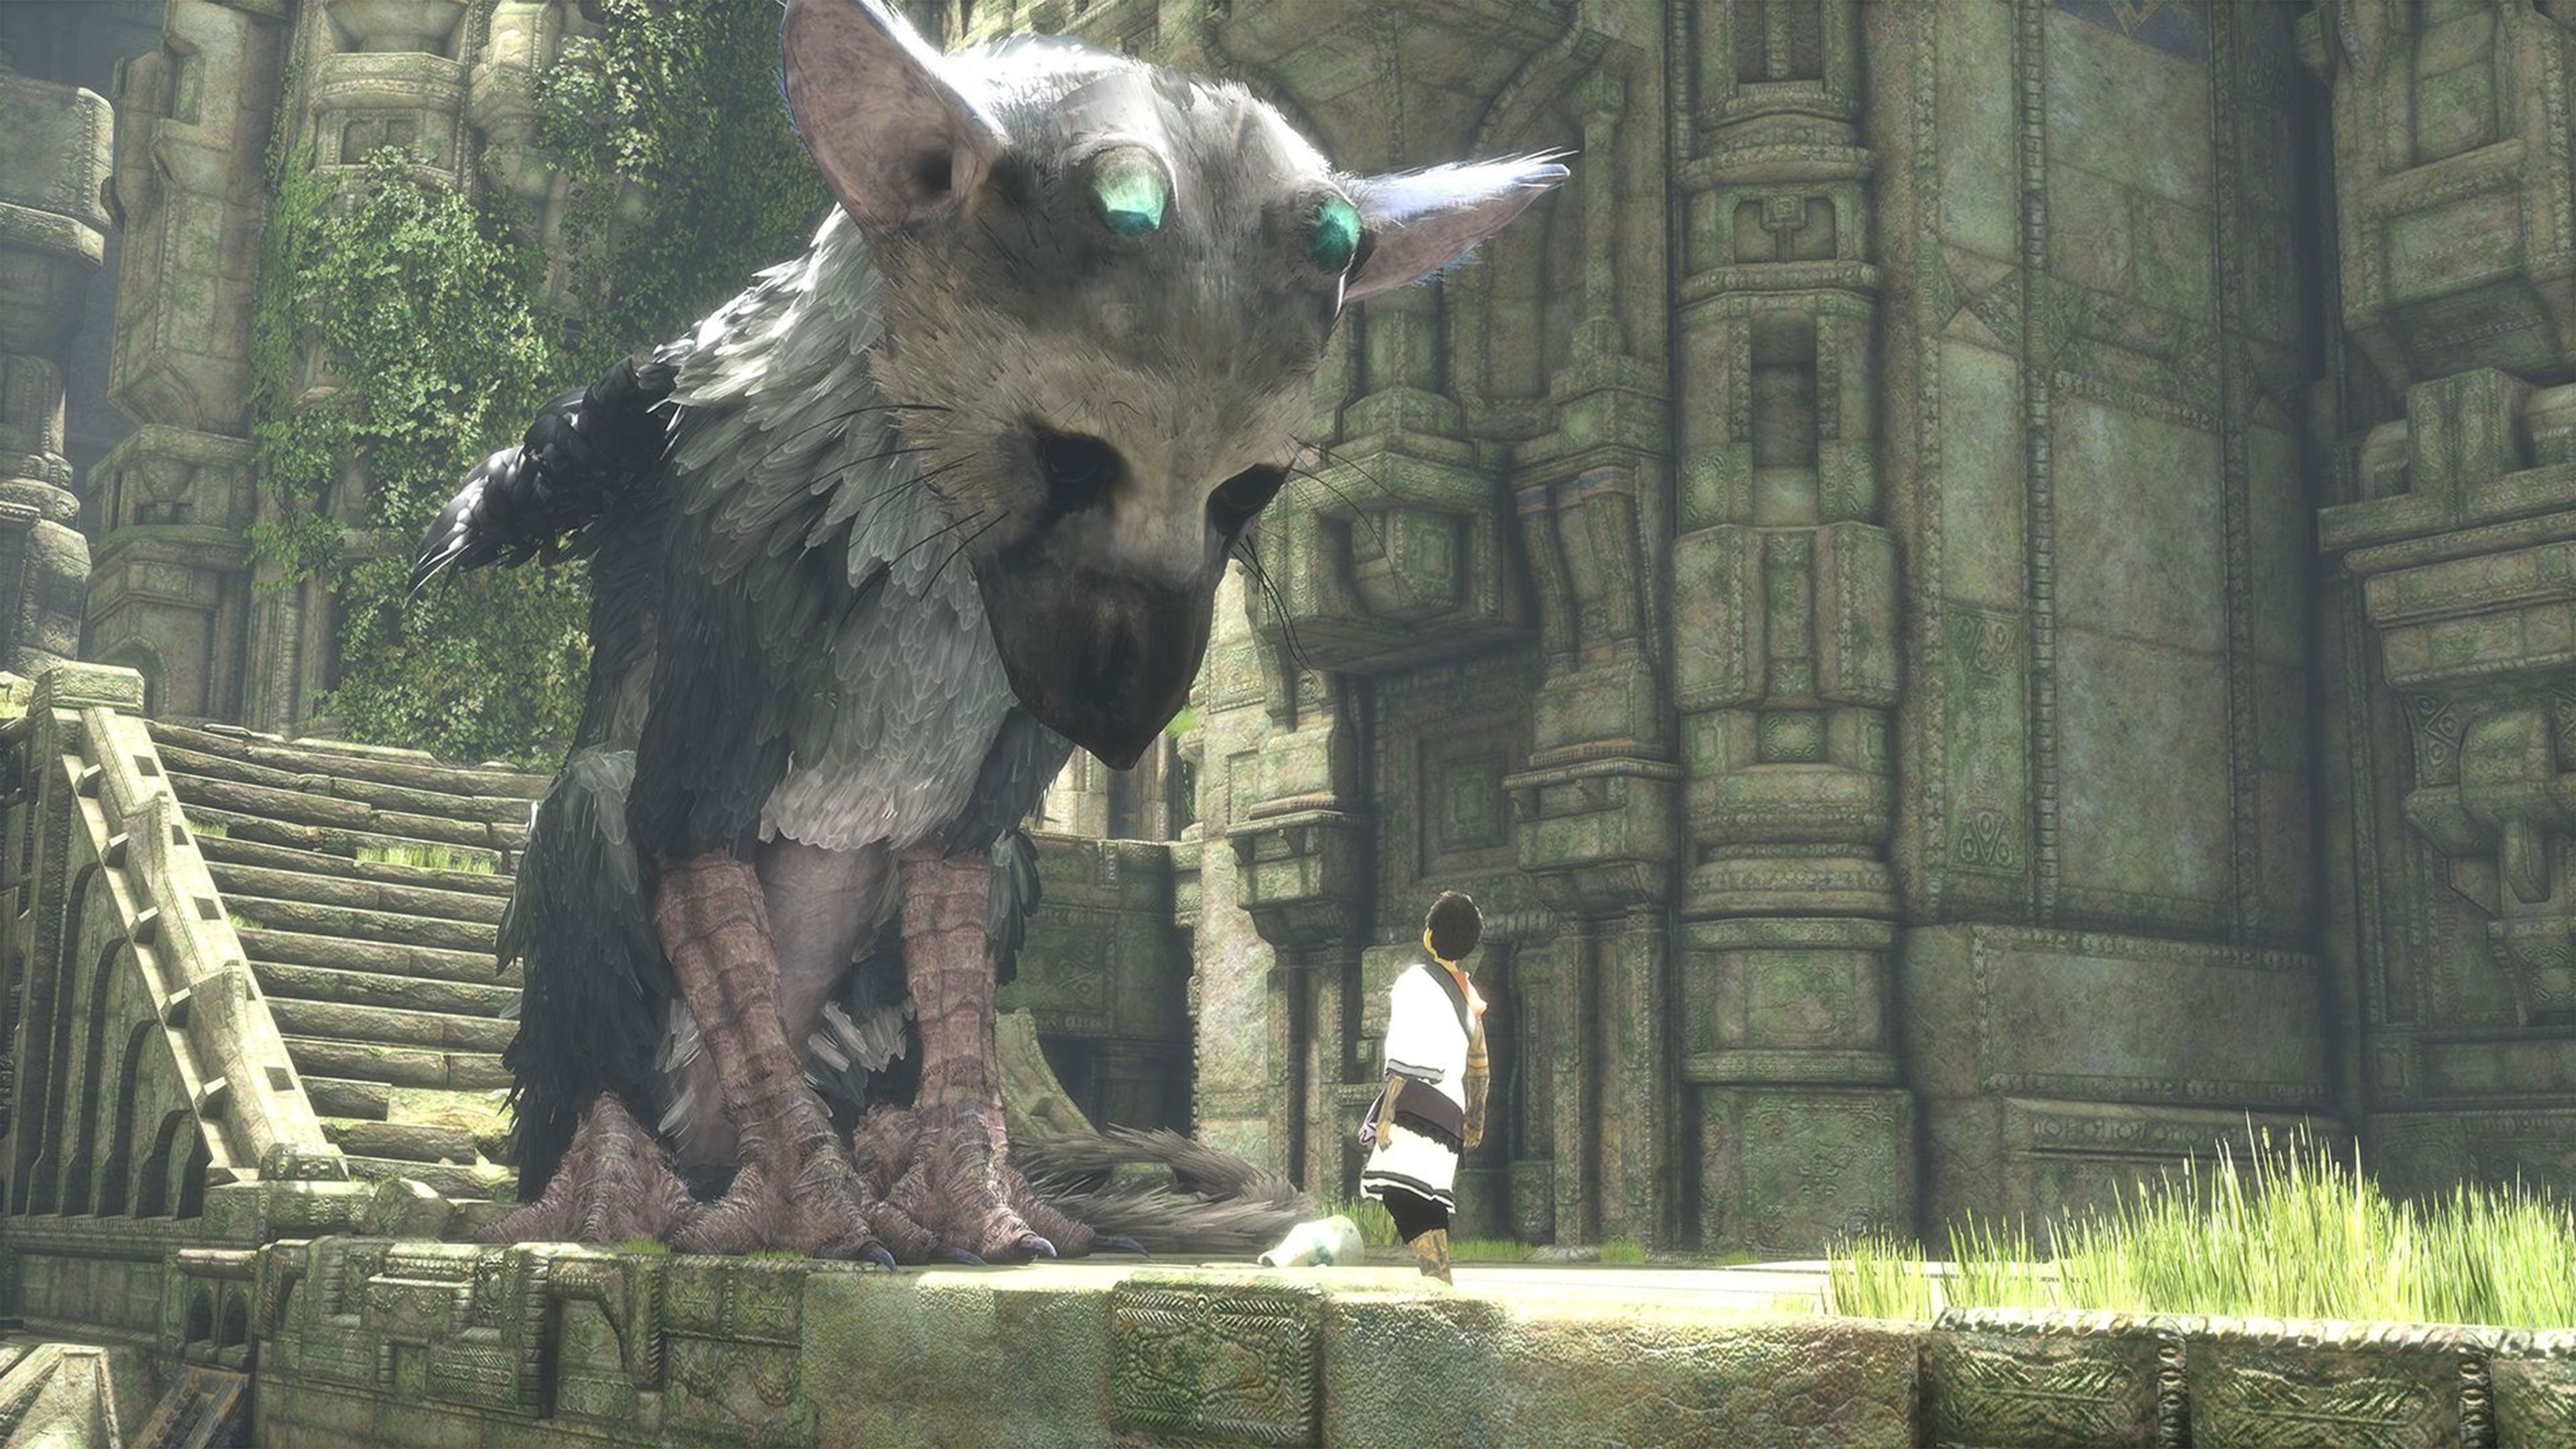 The last guardian - Fantasy & Abstract Background Wallpapers on Desktop  Nexus (Image 2711629)